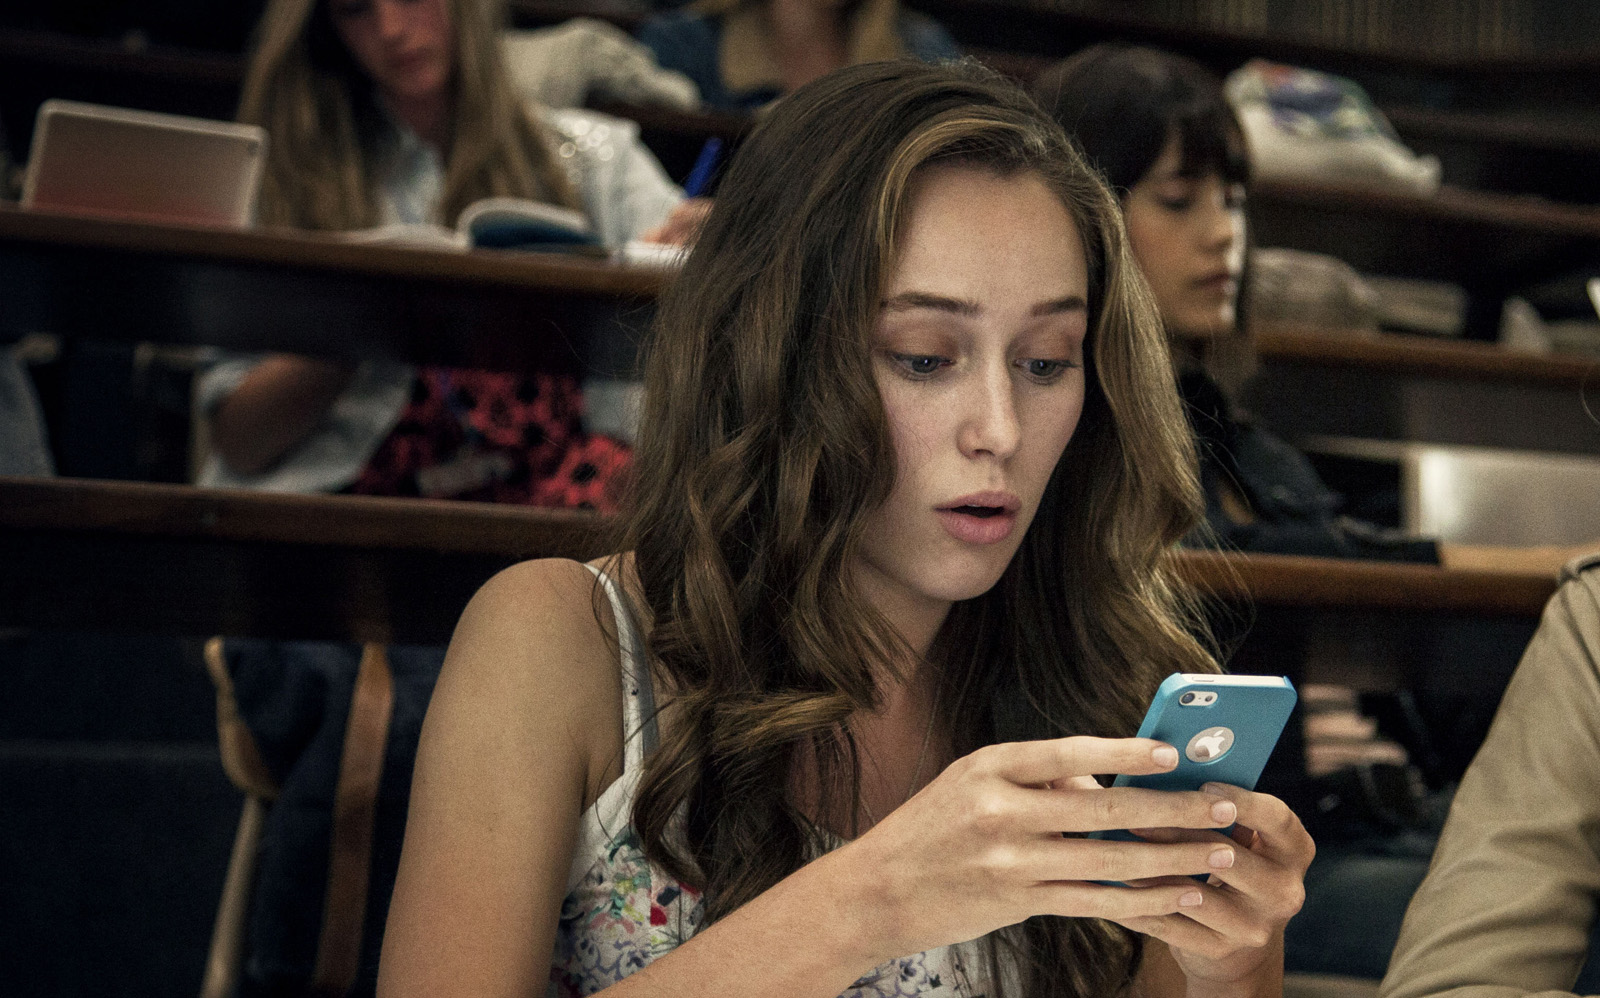 Scene 10; EXT, Campus, Laura (Alycia Debnam - Carey) is walking with Marina (Liesl Ahlers). She invites her to FB.